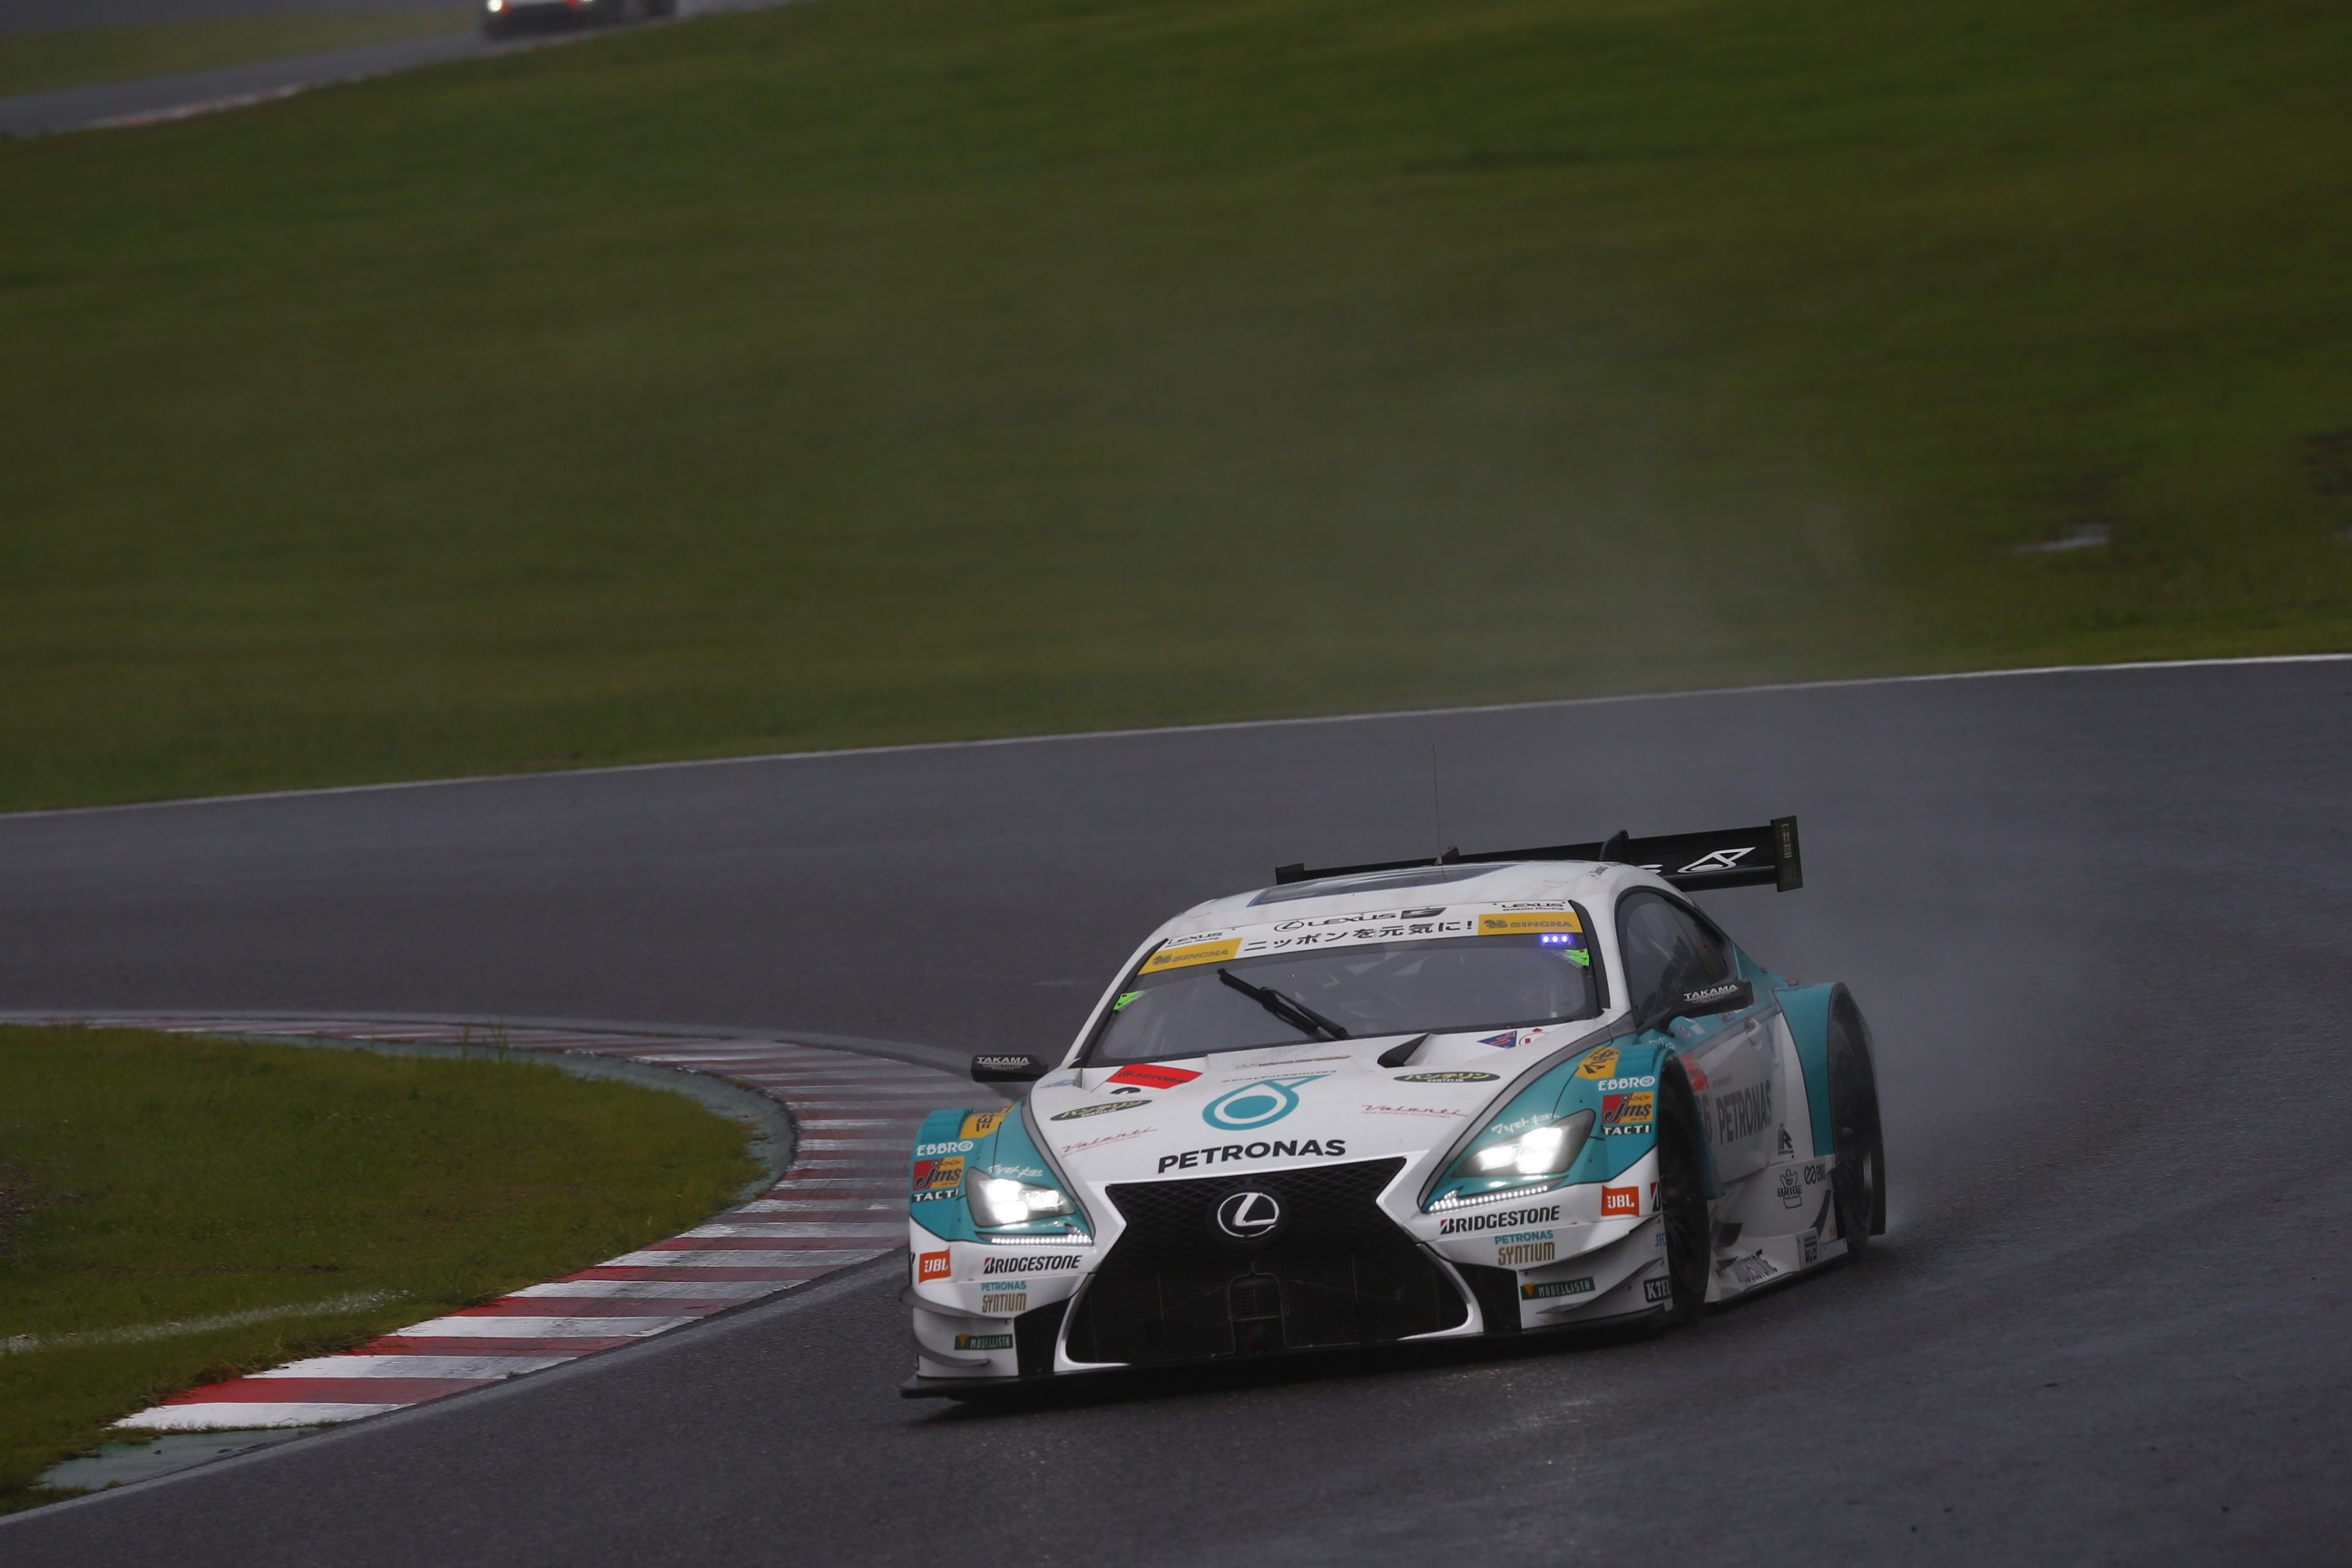 Petronas Tom S Rc F Finishes In 1st Place At The 15 Autobacs Super Gt 500 Series Race In Suzuka Lexus Bahrain